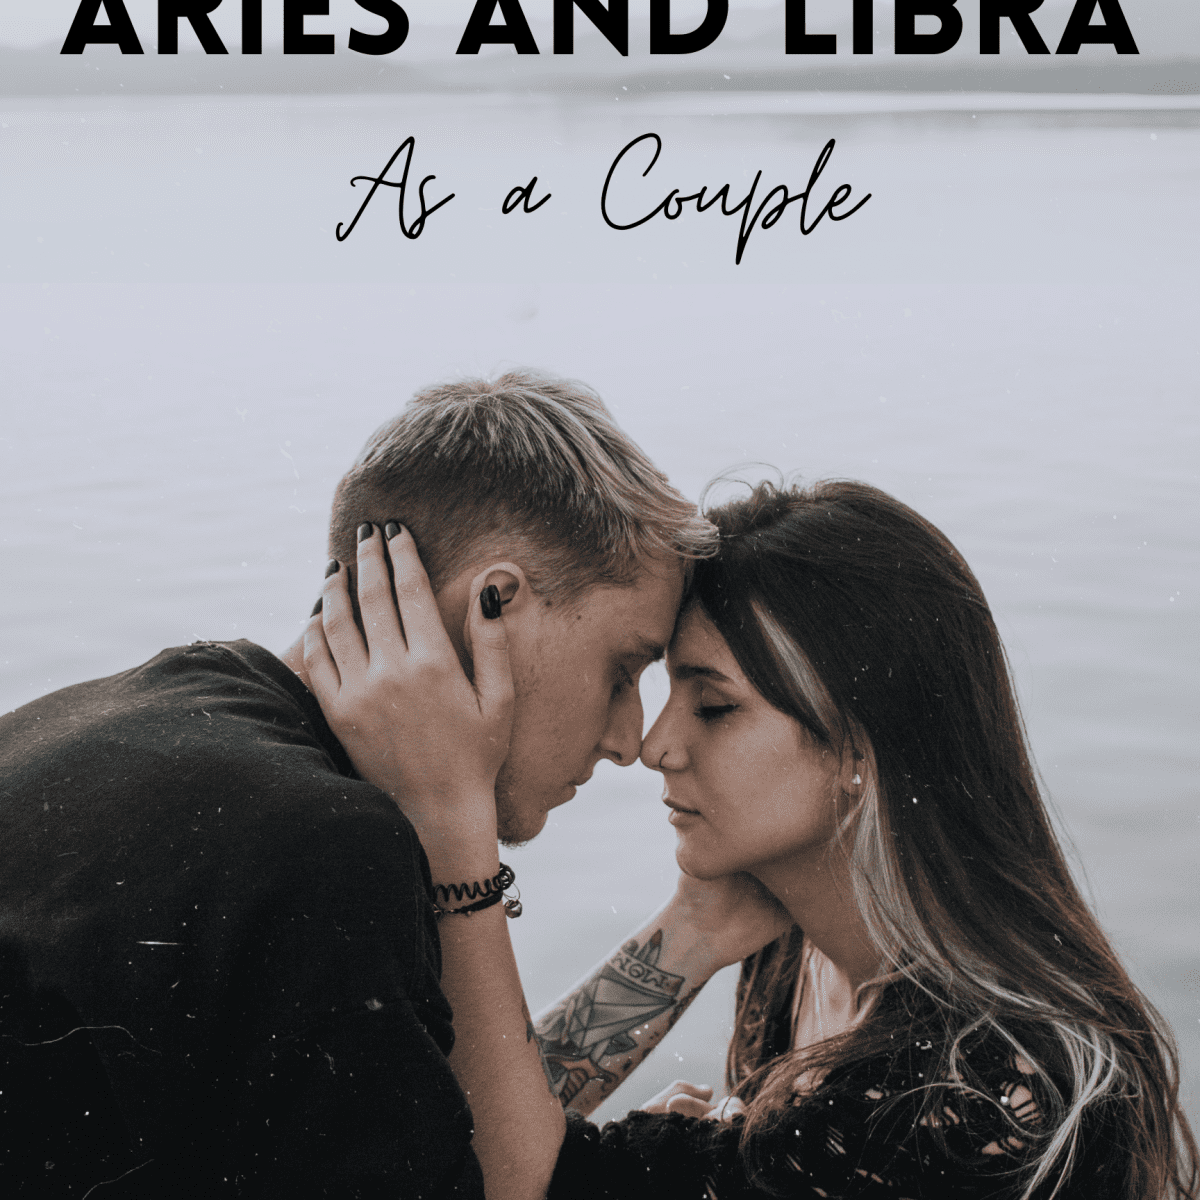 Why are libras so attracted to aries?